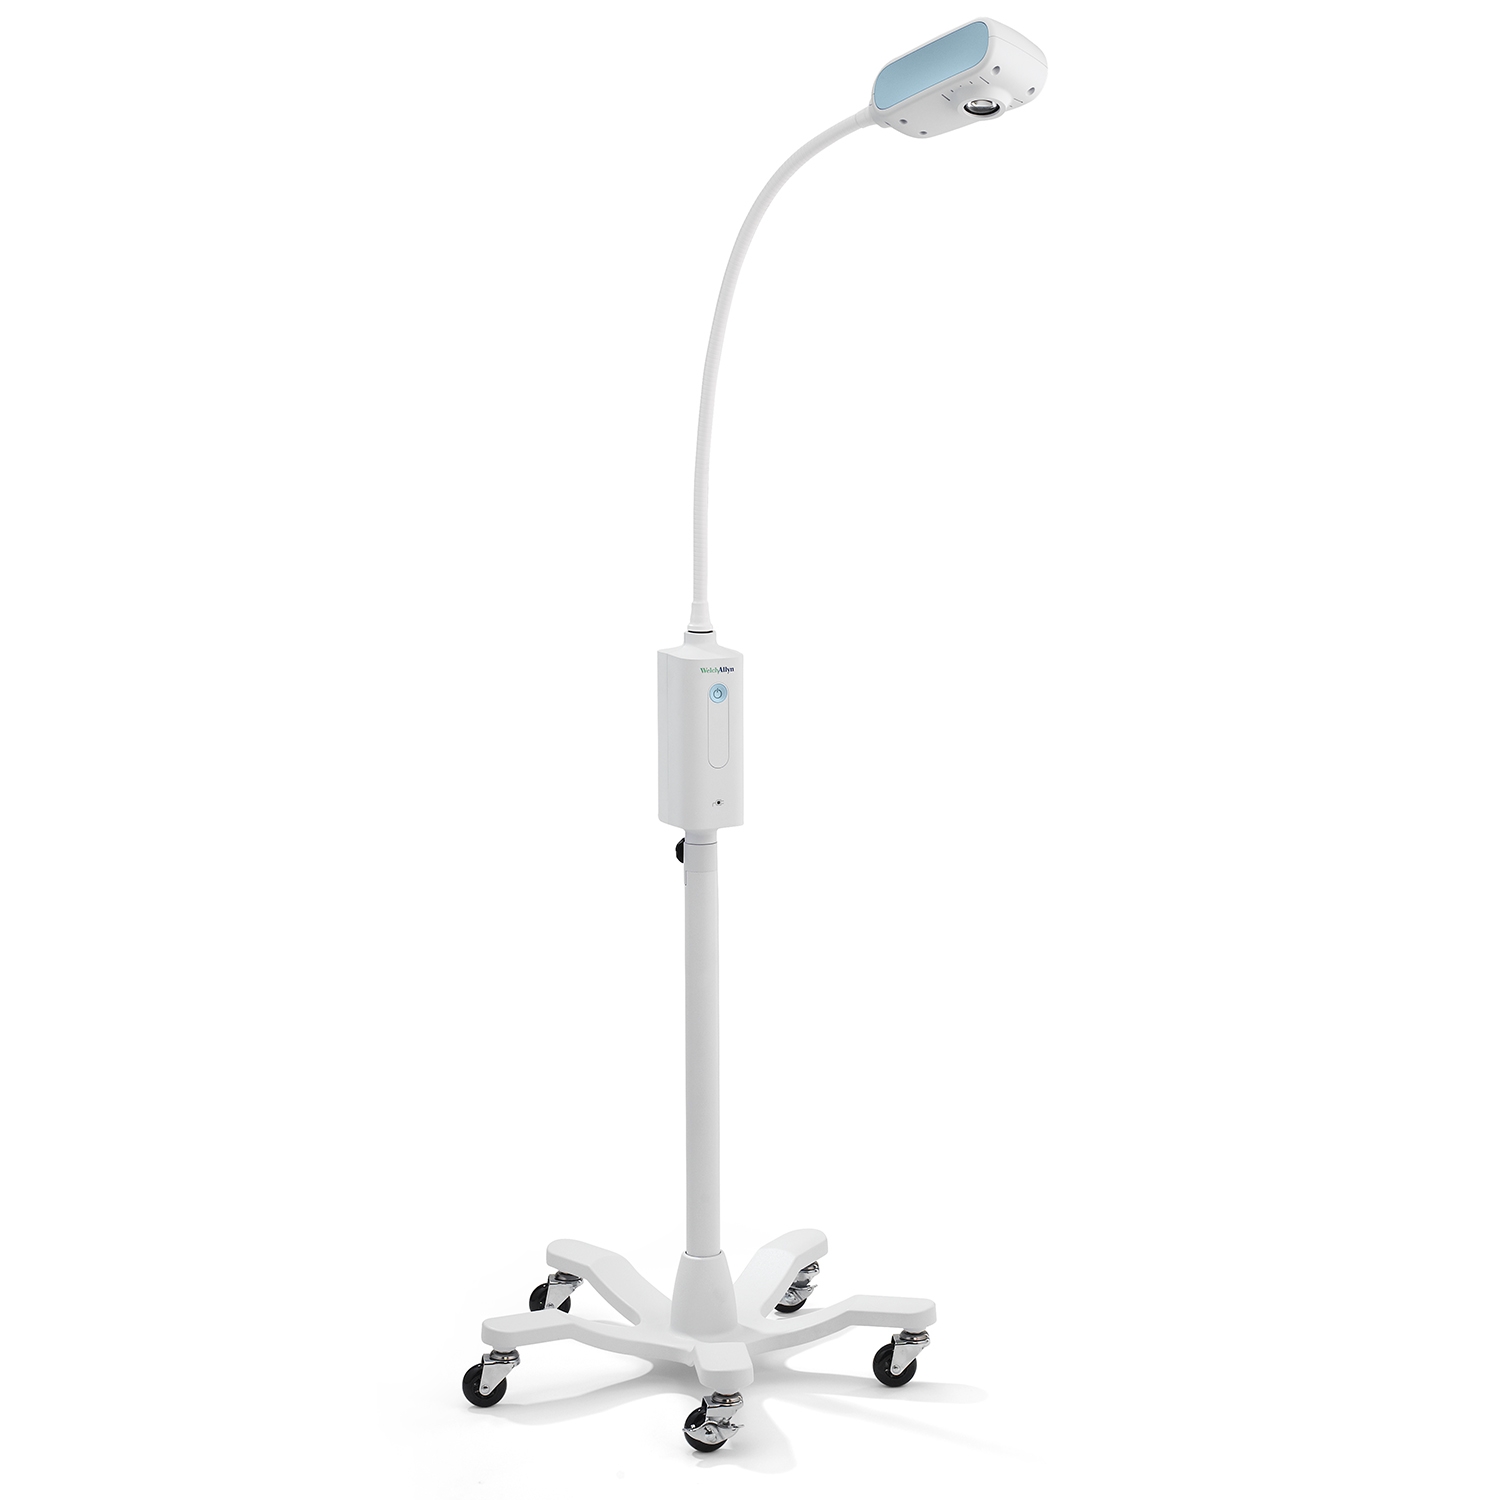 Welch Allyn lampe d'examen GS300 LED + pied roulant